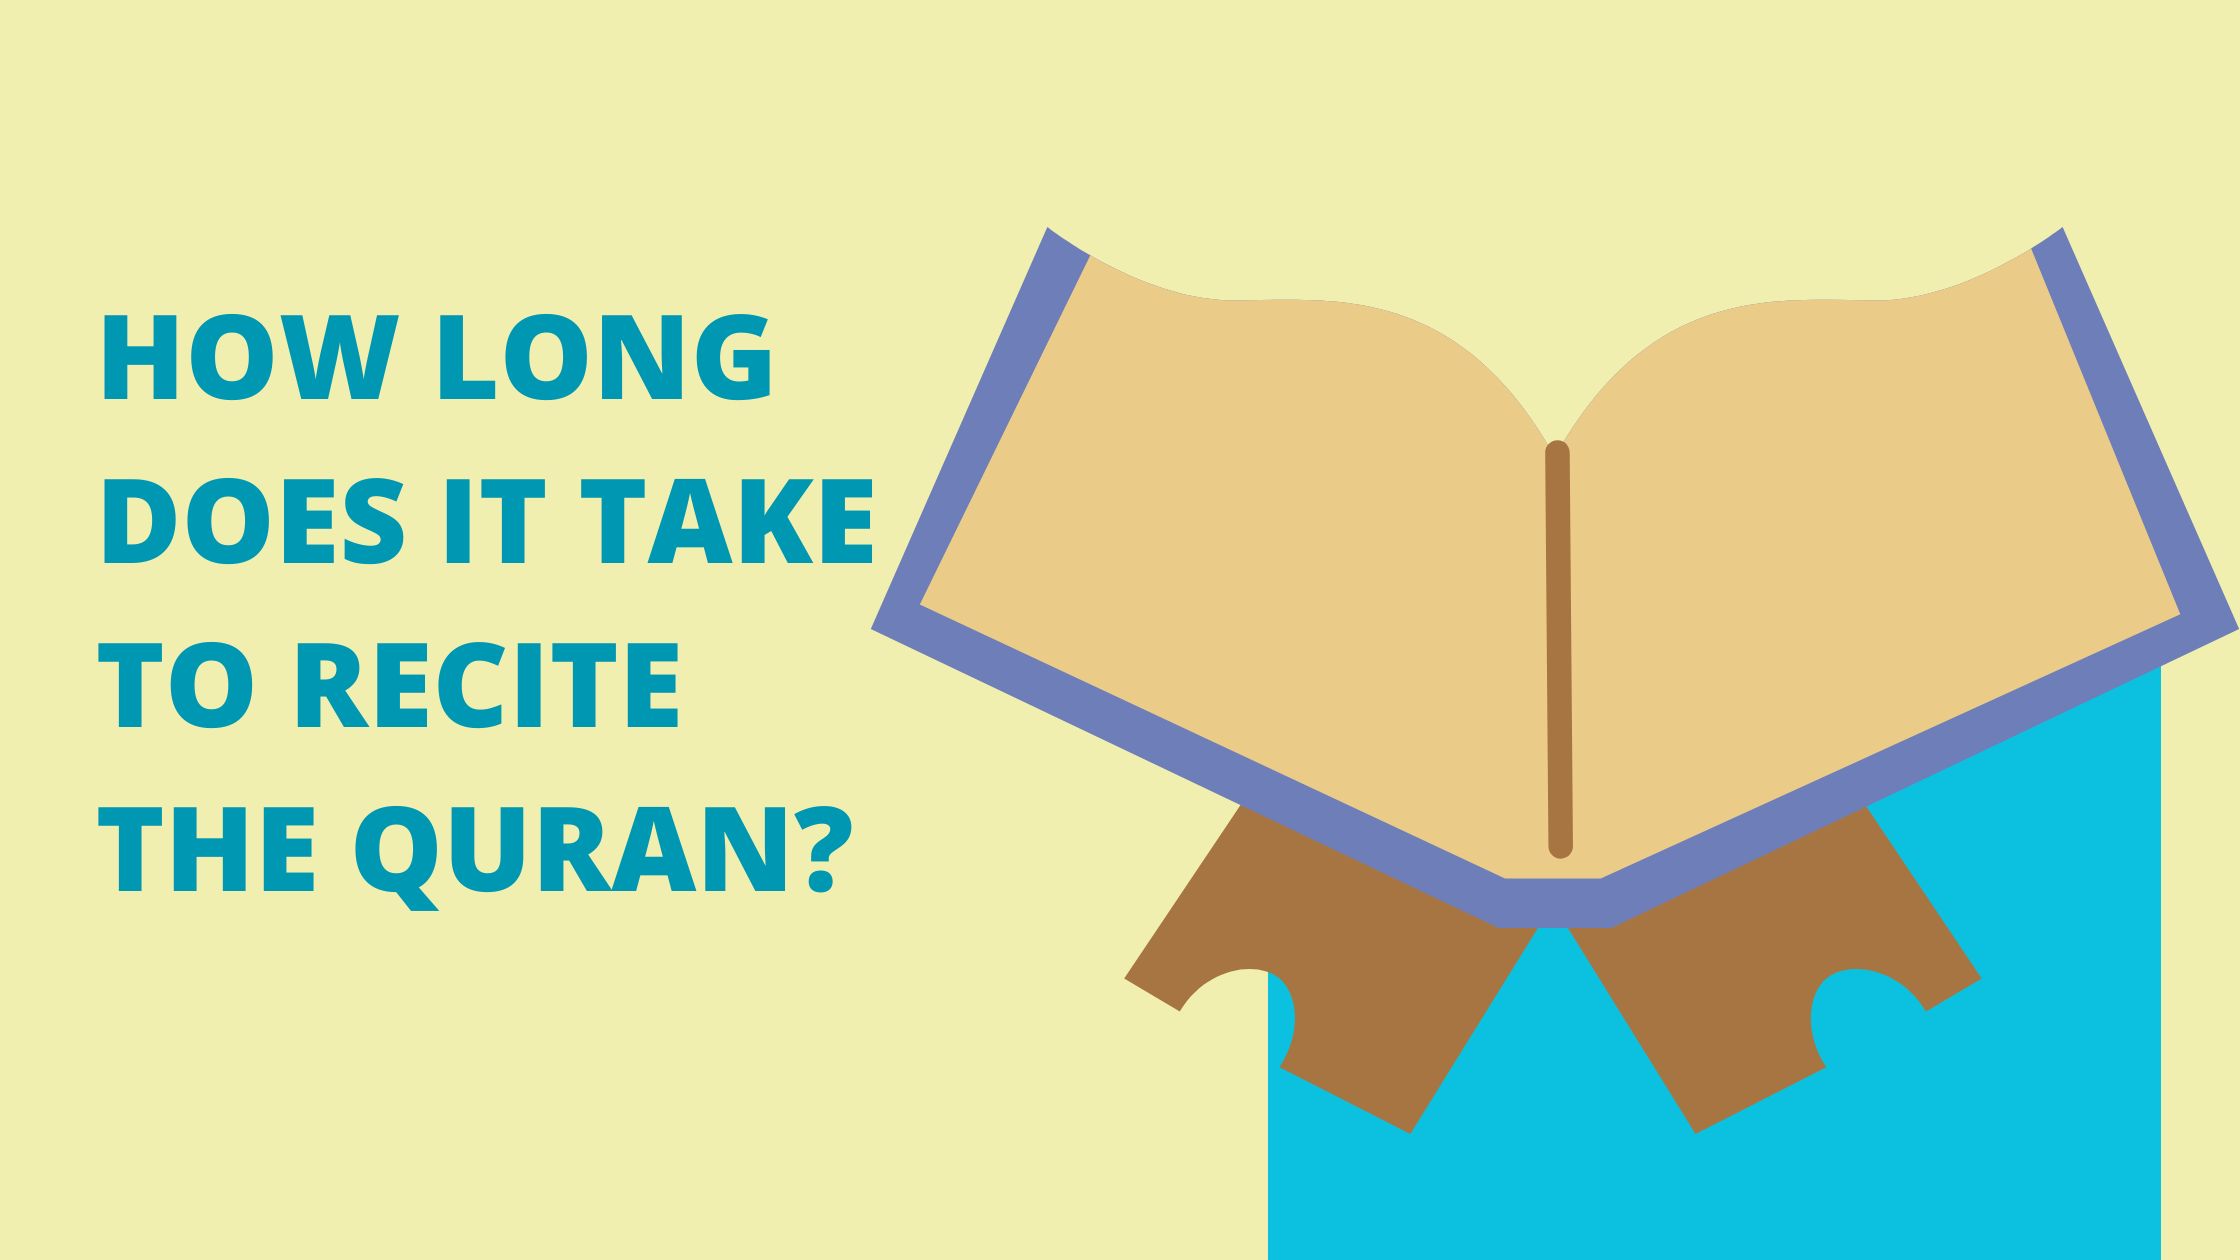 How Long Does It Take to Recite The Quran